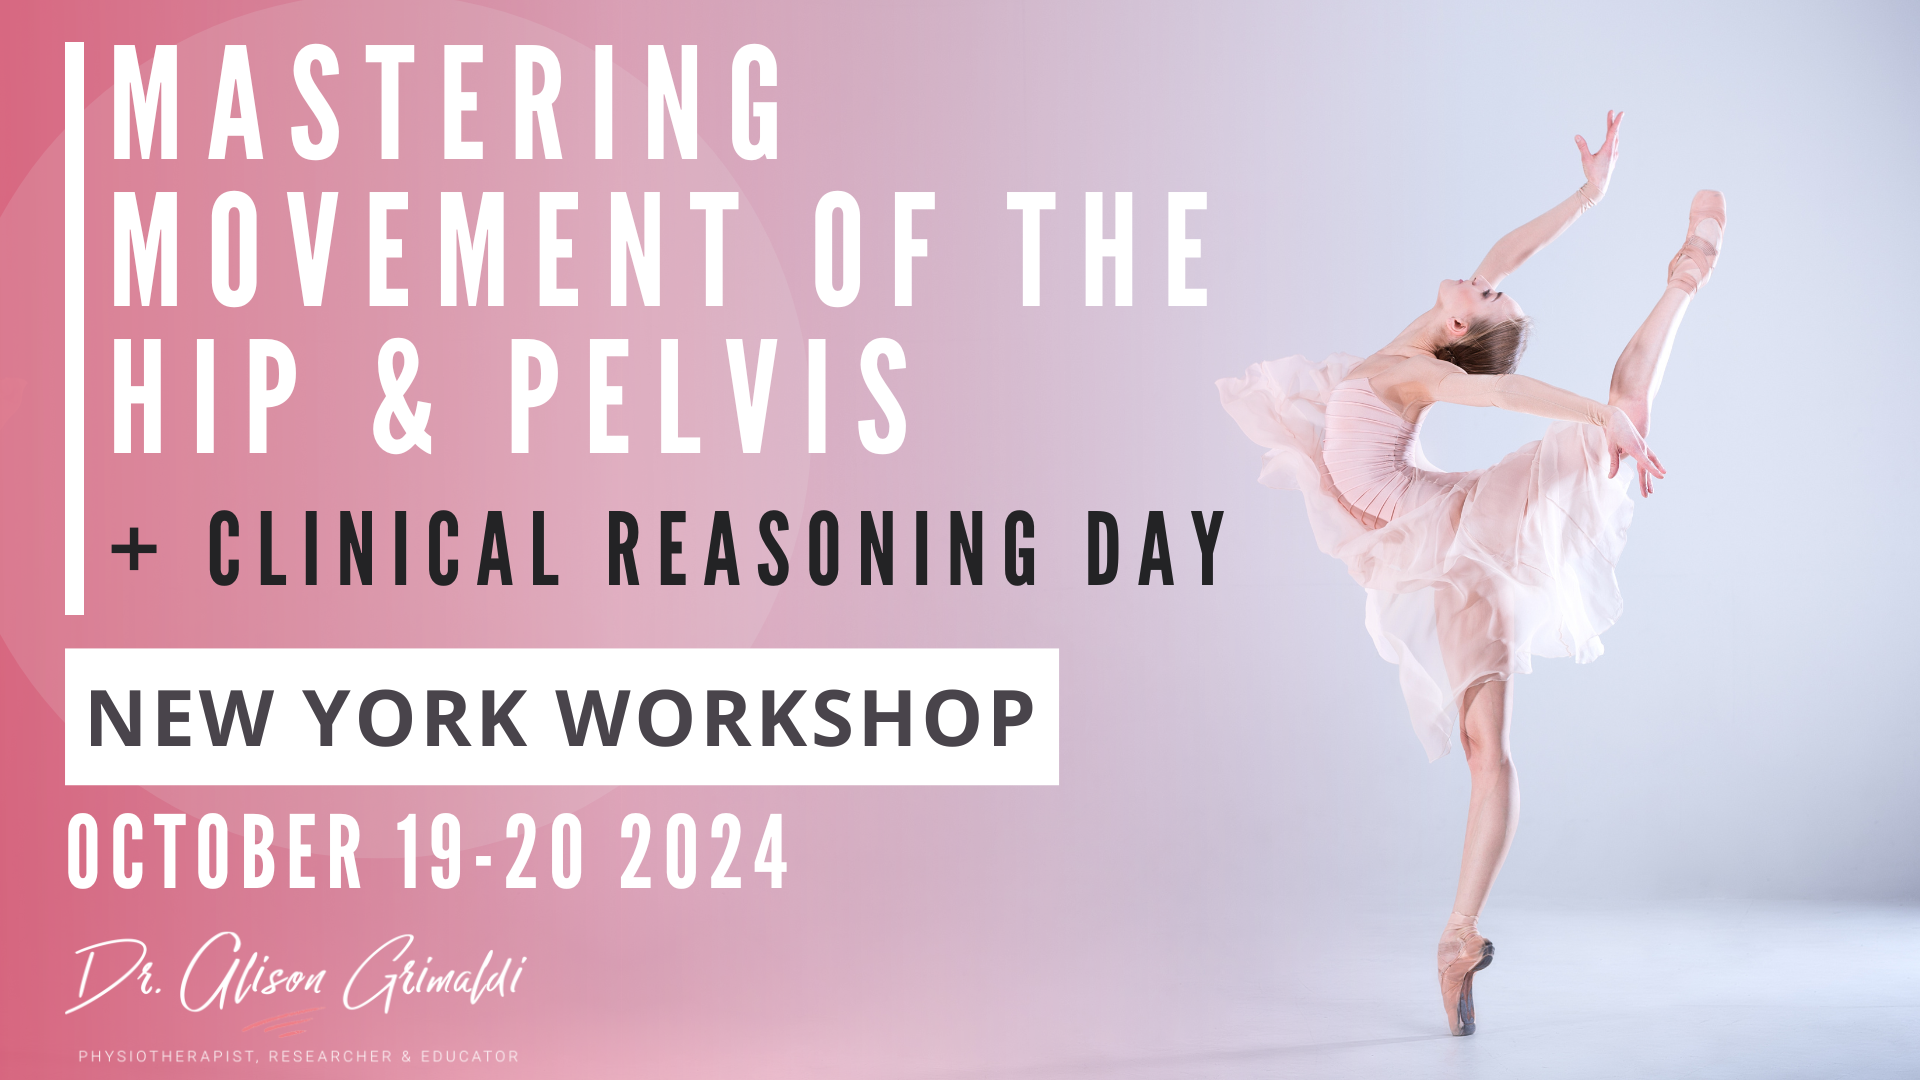 Mastering-Movement-of-the-Hip-and-Pelvis-Workshop-With-Clinical-Reasoning-Day-New-York-2024